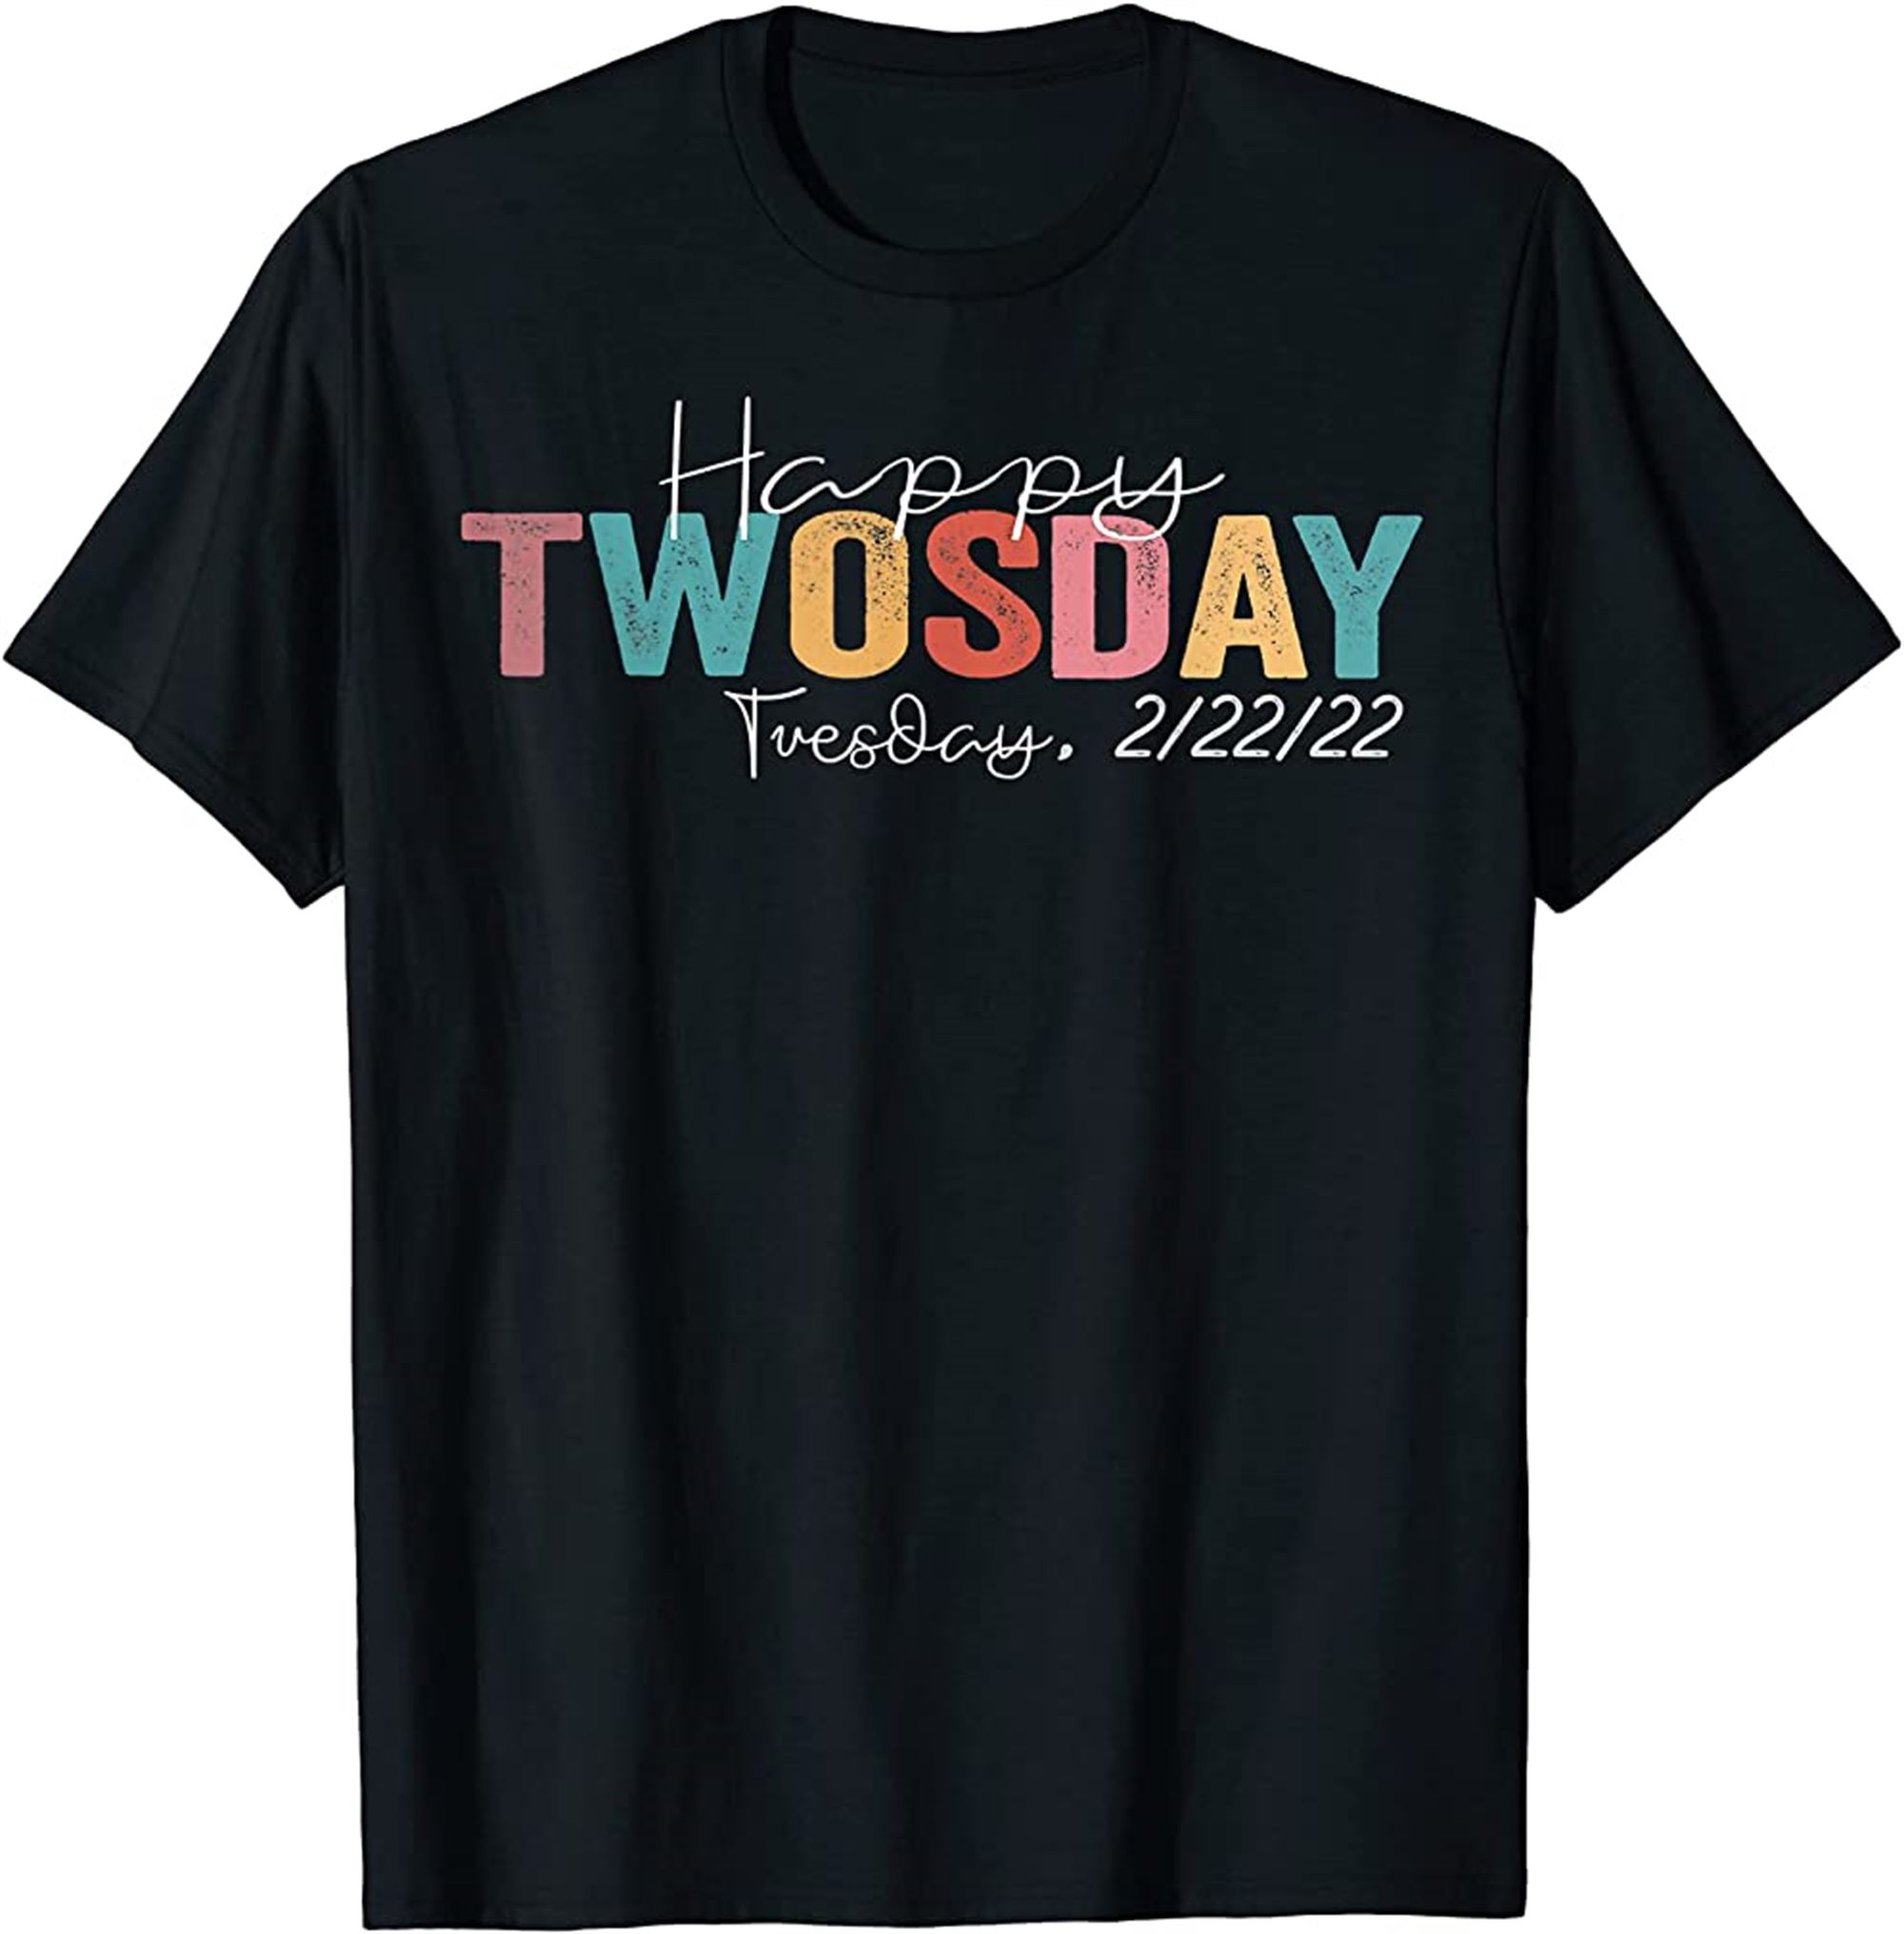 February 22nd 2022 2 22 22 Happy Twosday 2022 Tshirt Full Size Up To 5xl